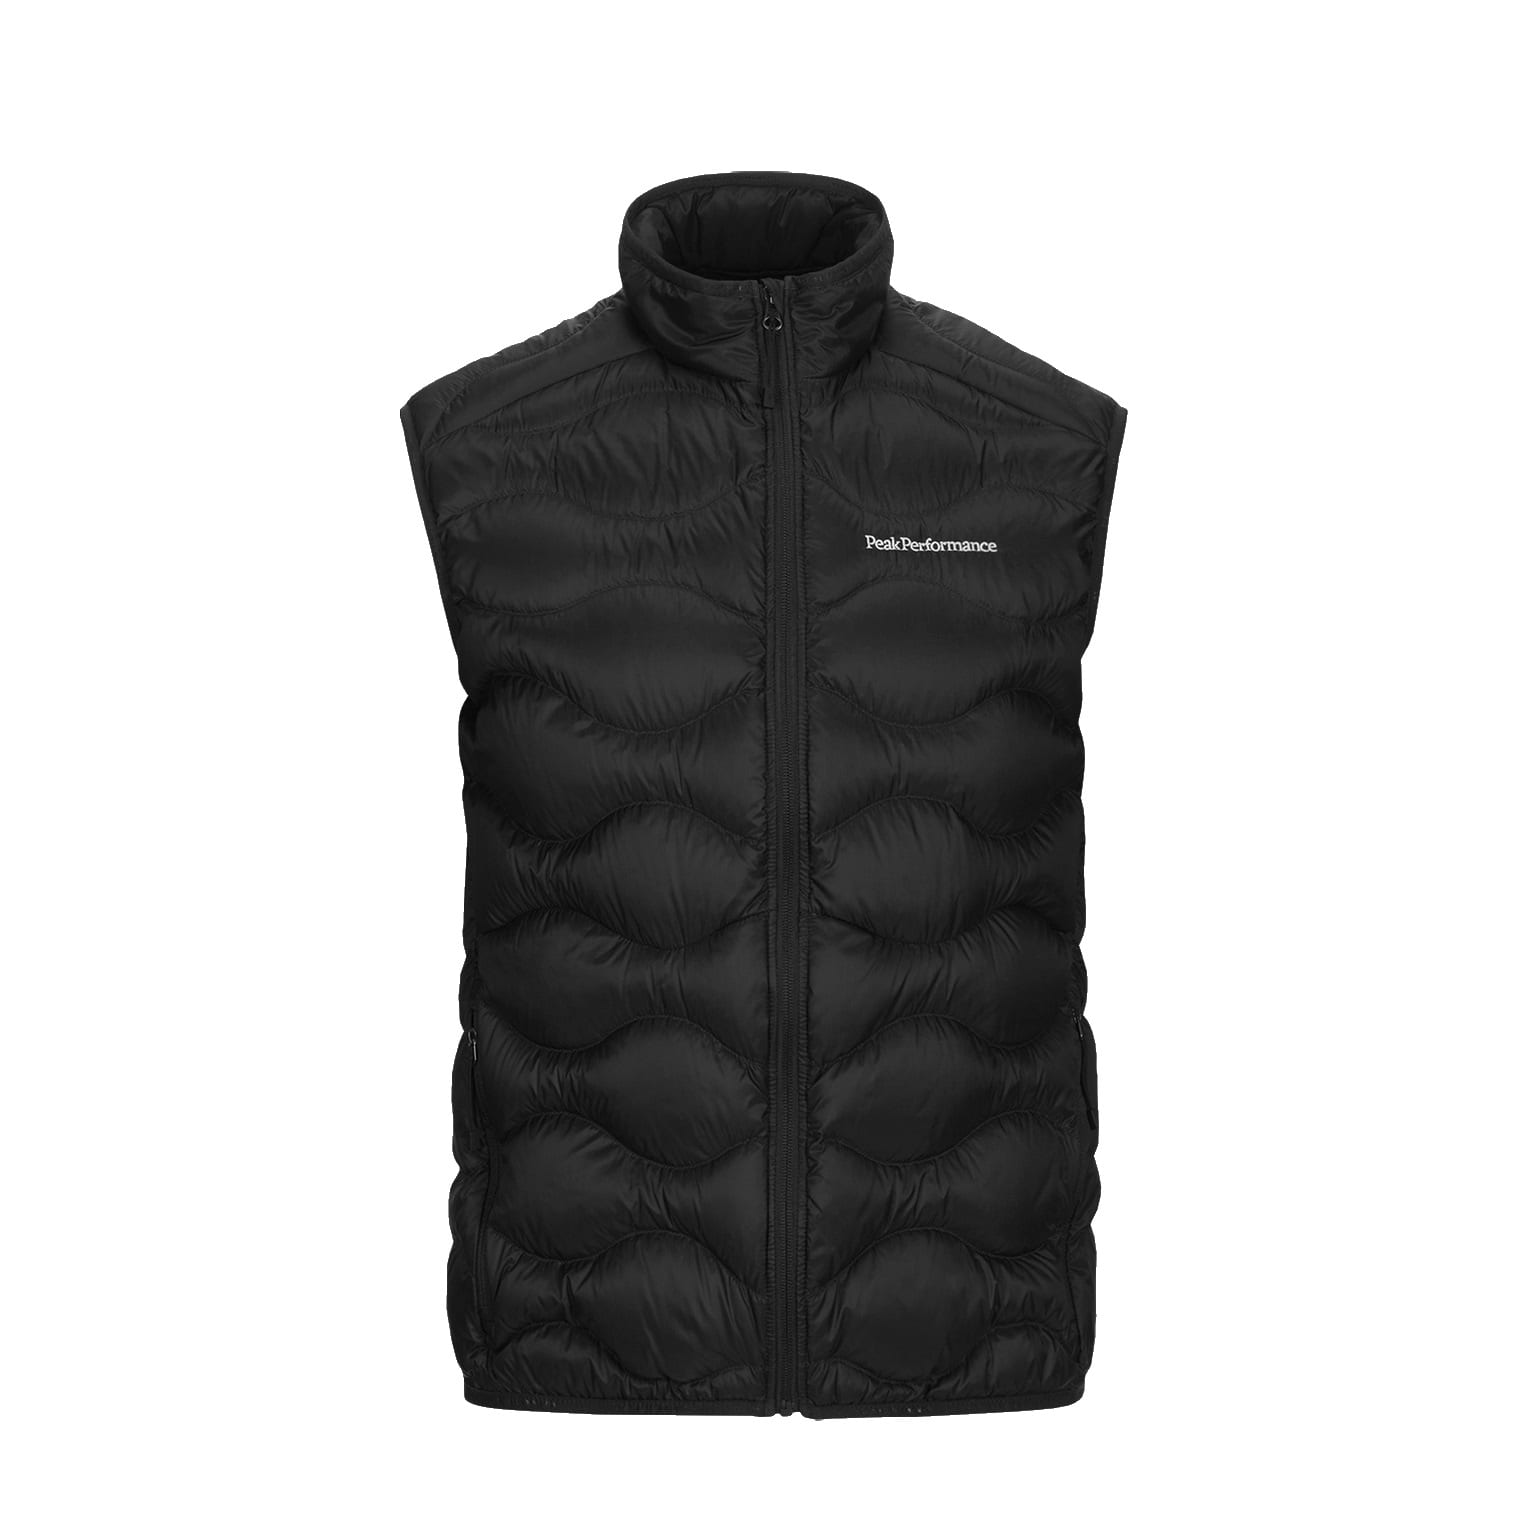 Buy Performance Men's Helium Vest from Outnorth